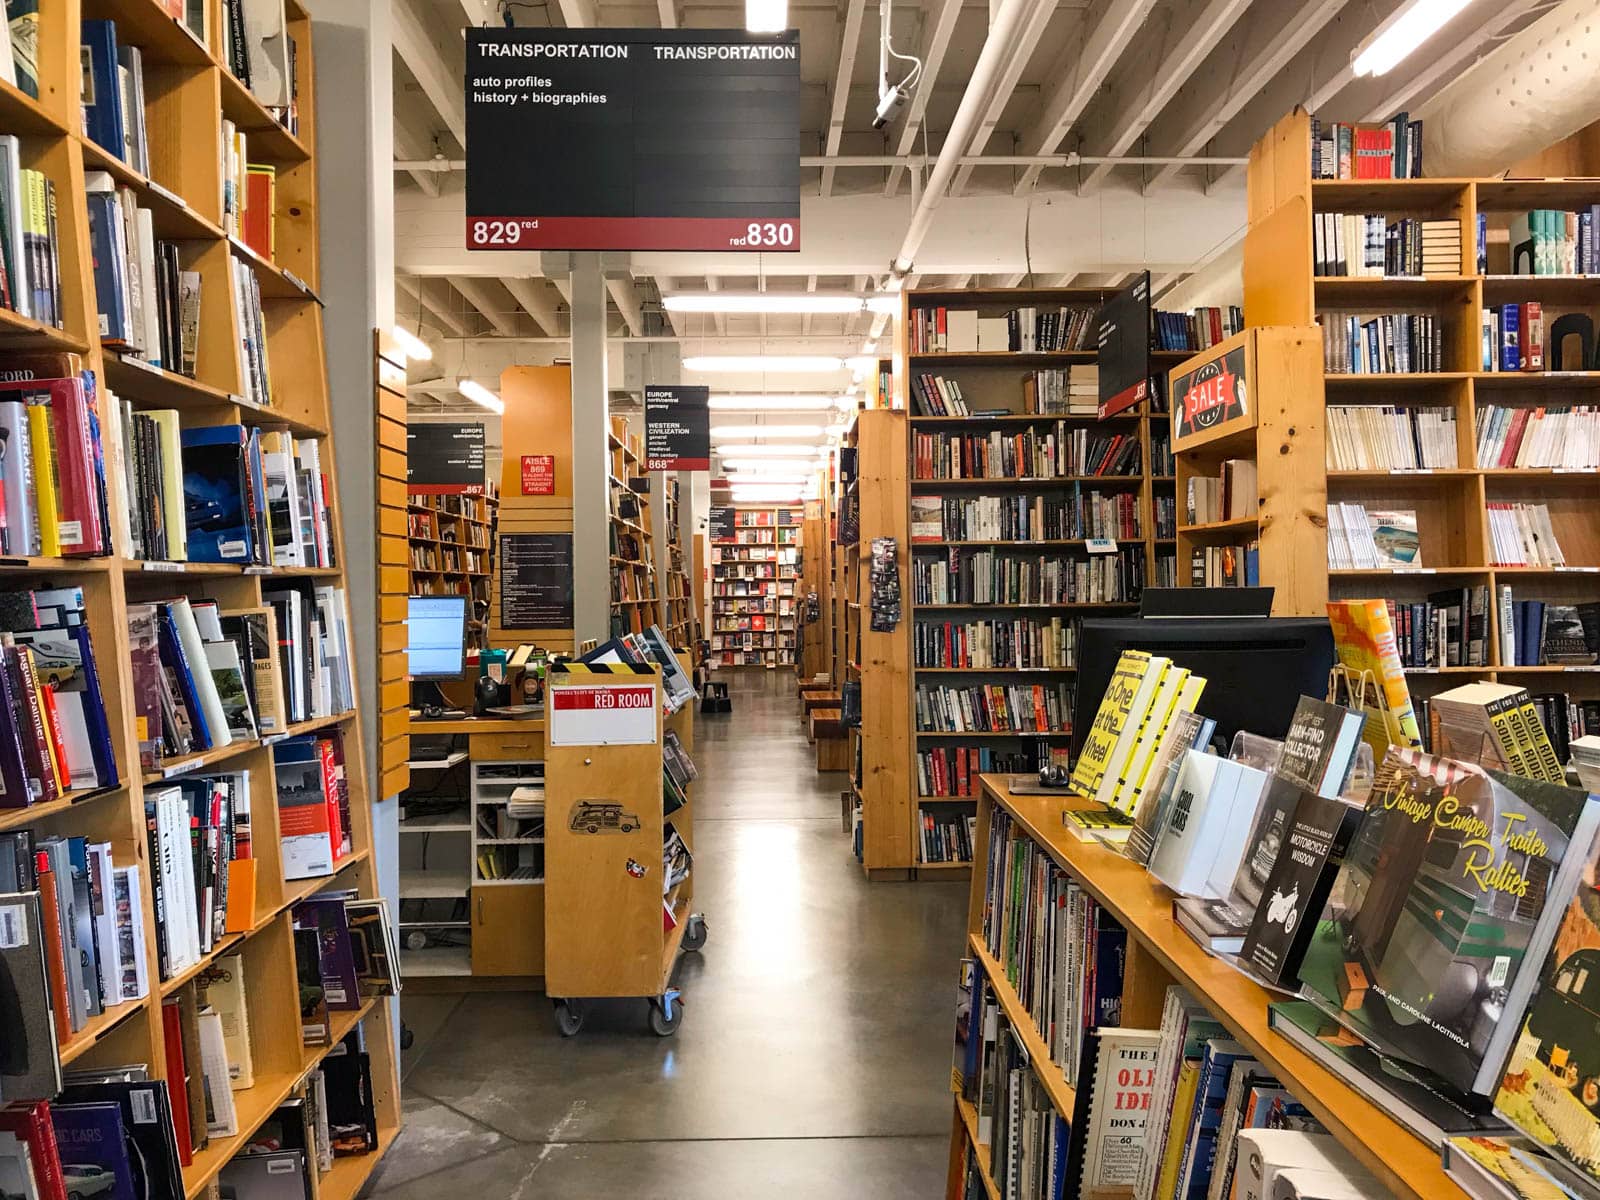 The inside of a bookstore with yellow-brown shelving, almost as tall as the ceiling, filled with books. Signs from the ceiling indicate the various genres of books in each of the aisles.